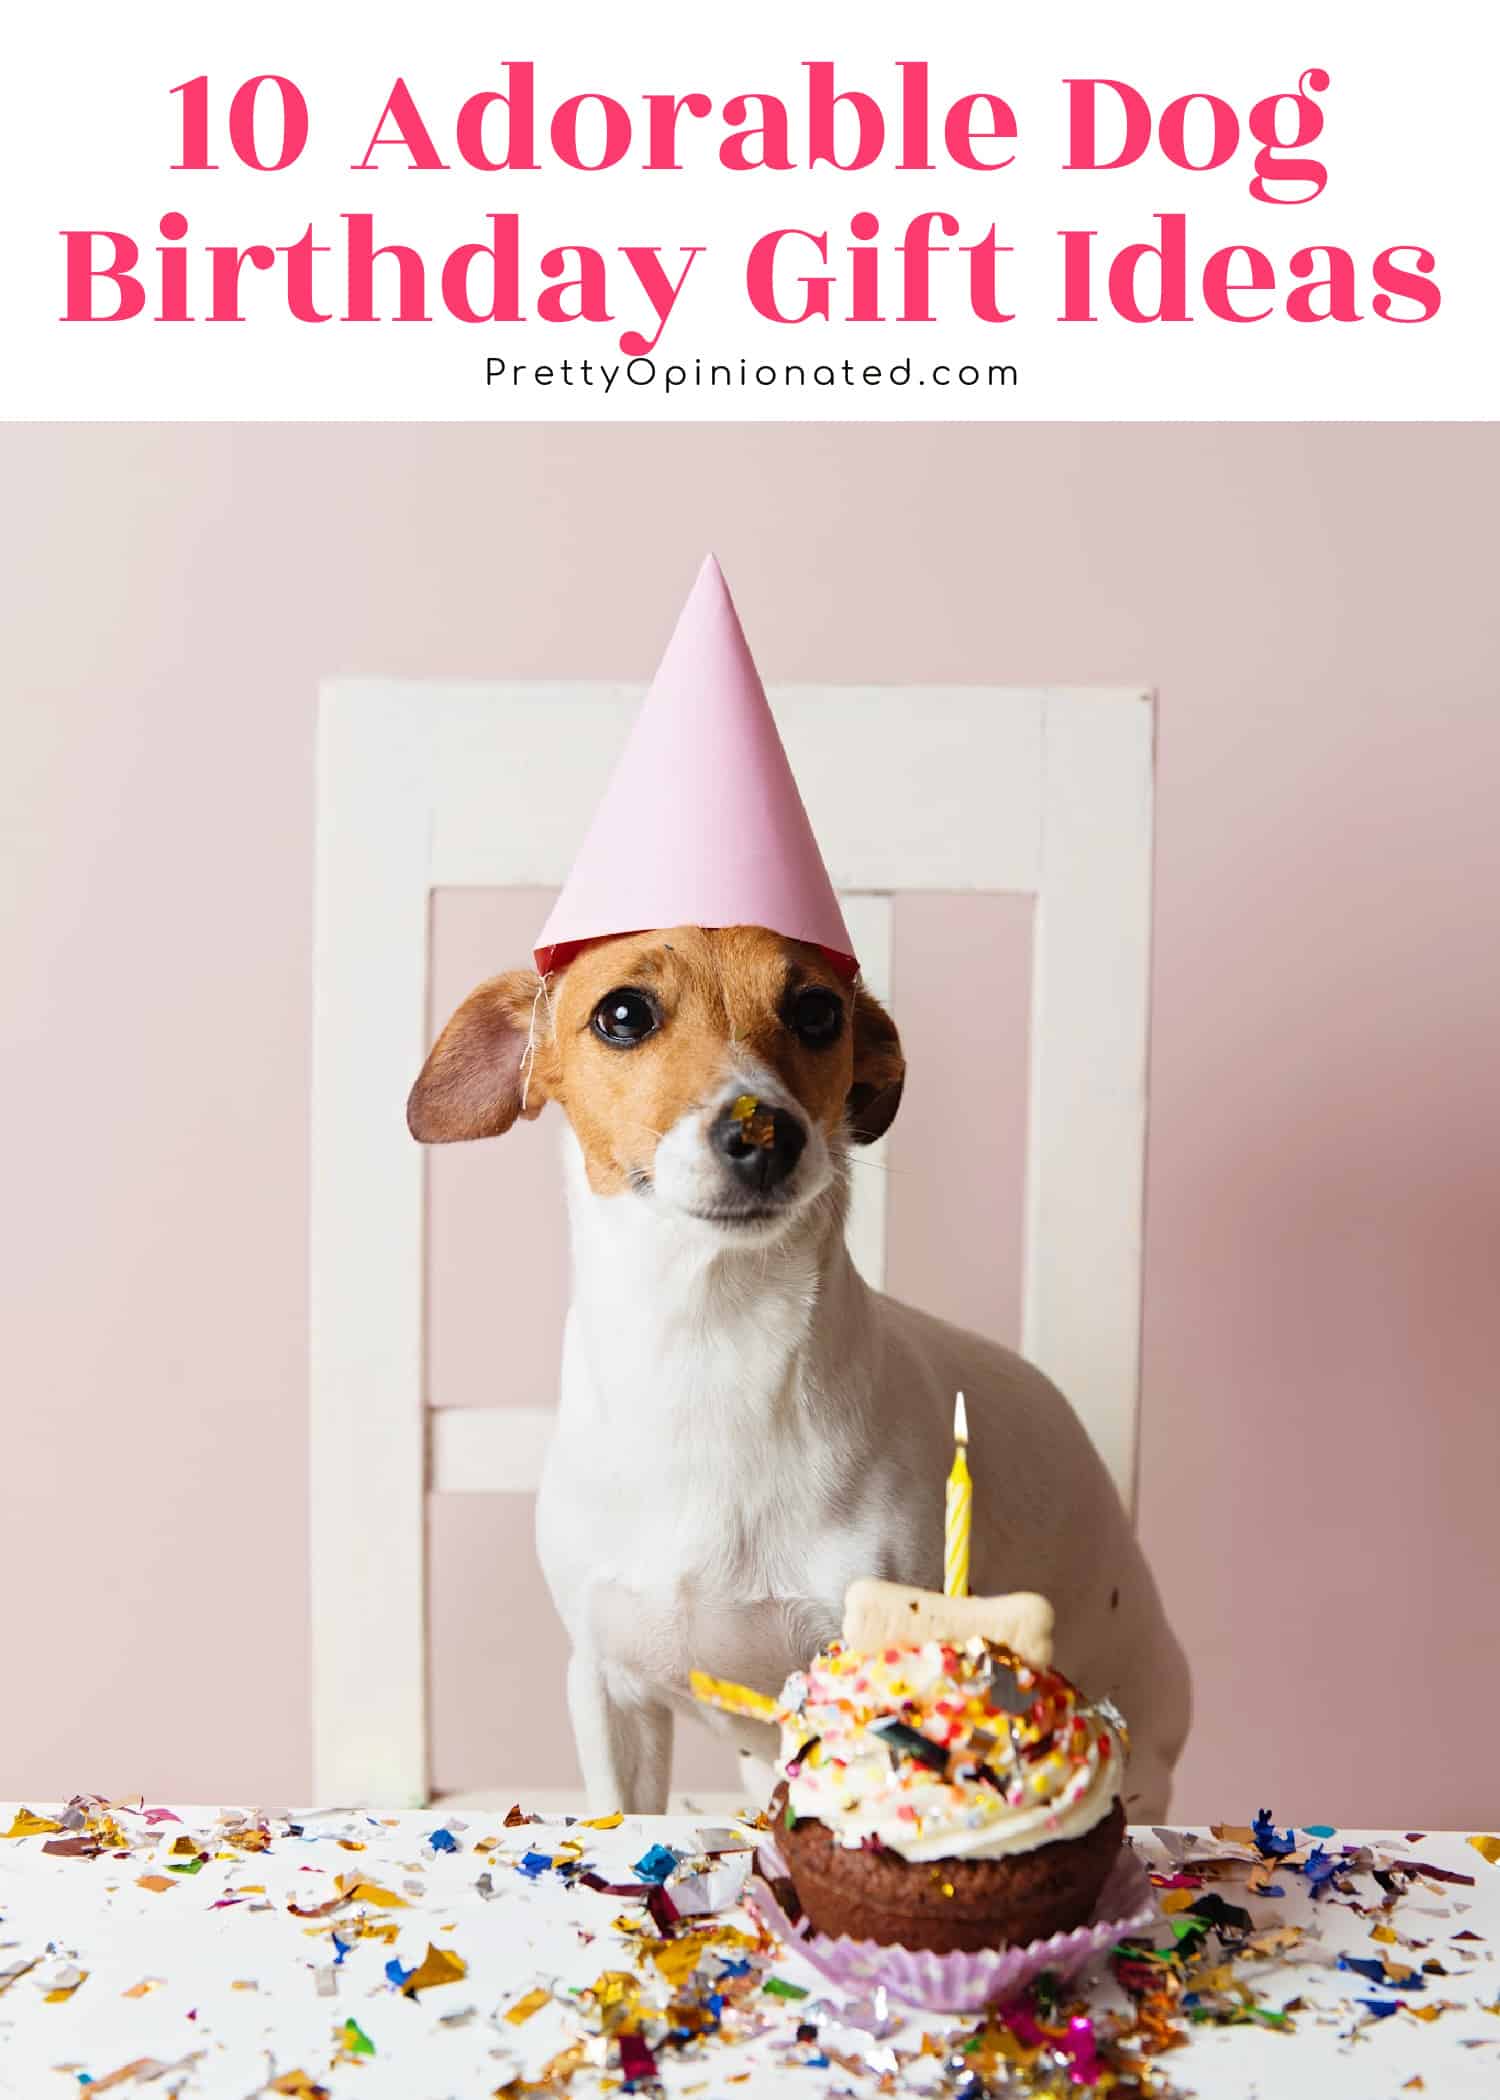 From adorable homemade cakes and "Barkcuterie" boards to toys that sing to boxes loaded with fun goodies, these are by far the cutest and best dog birthday gift ideas around. Check them out!